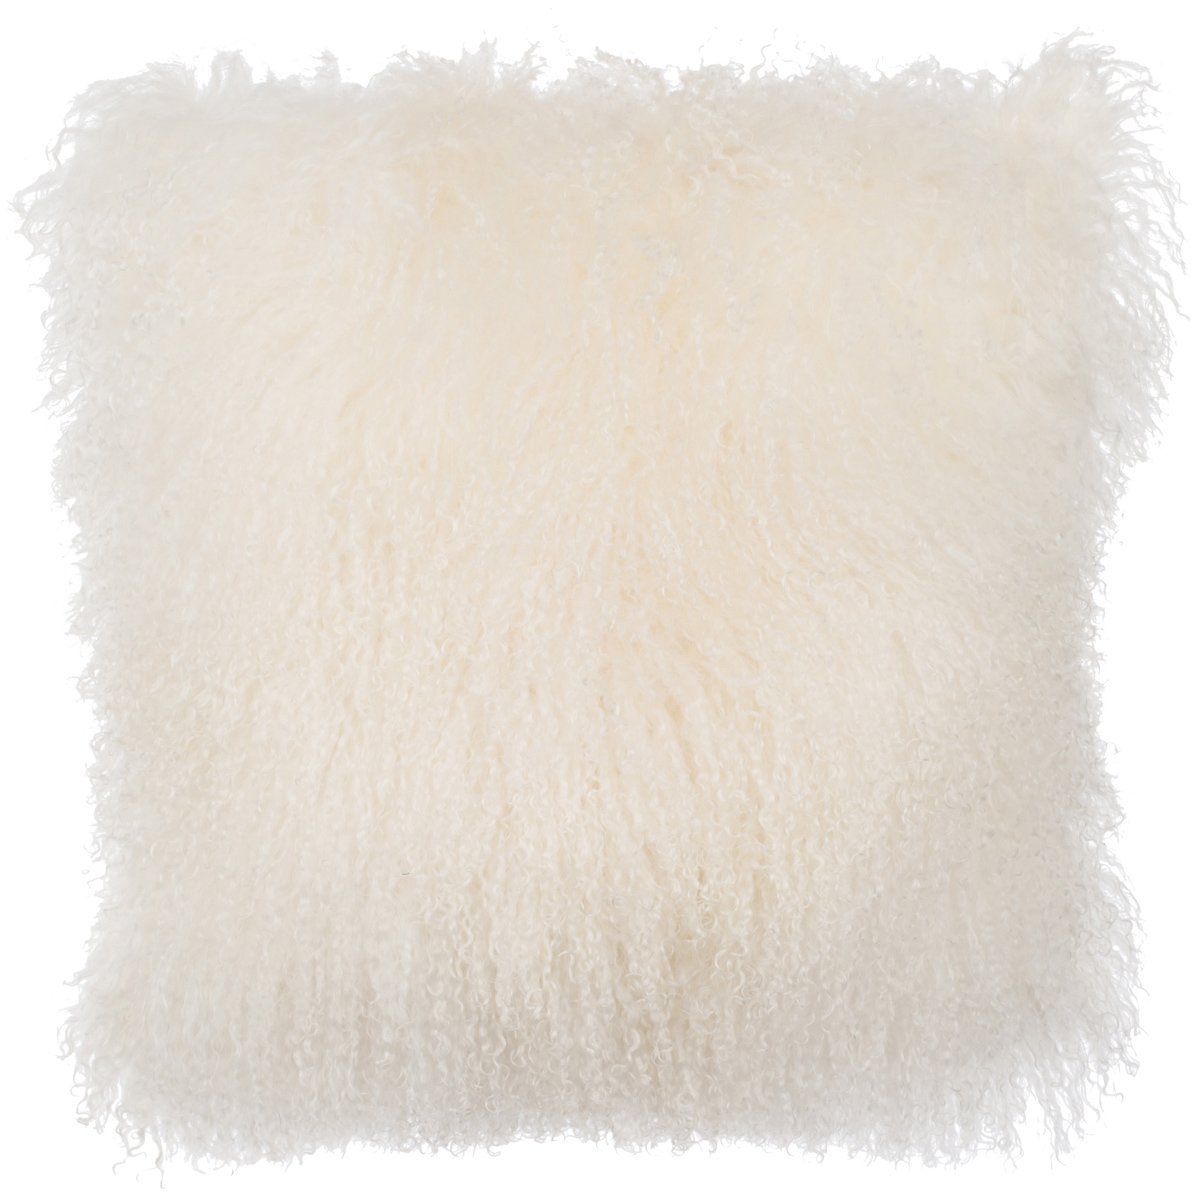 SLPR Mongolian Lamb Fur Throw Pillow Cover (16'' x 16'', Natural) | Real Fur Decorative Cushion Cover Pillow Case for Living Room Bedroom